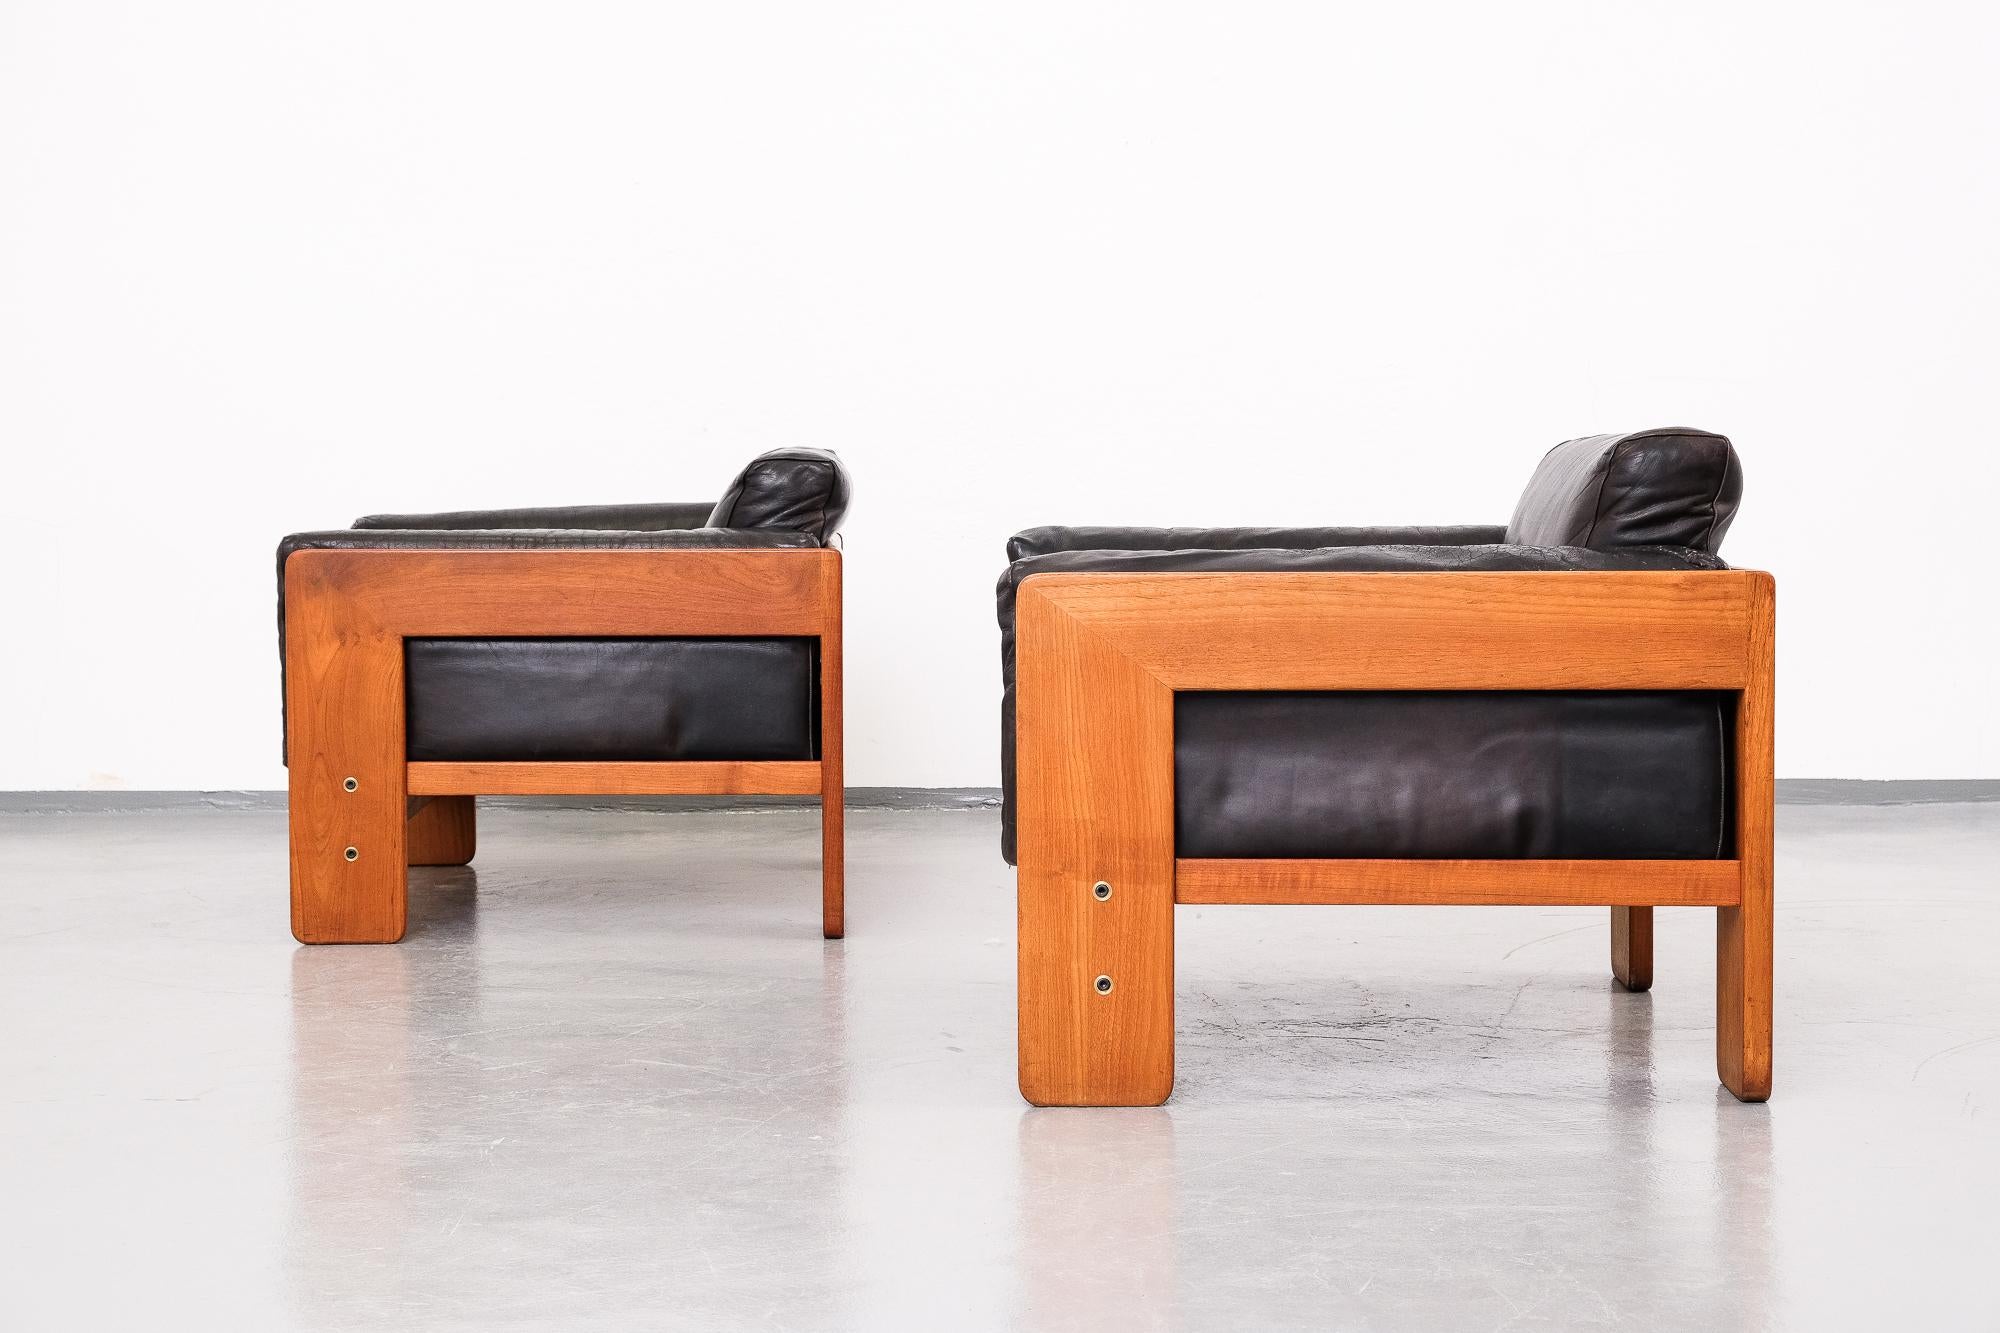 Tobia Scarpa 'Bastiano' Lounge Chairs in Teak and Black Leather 1